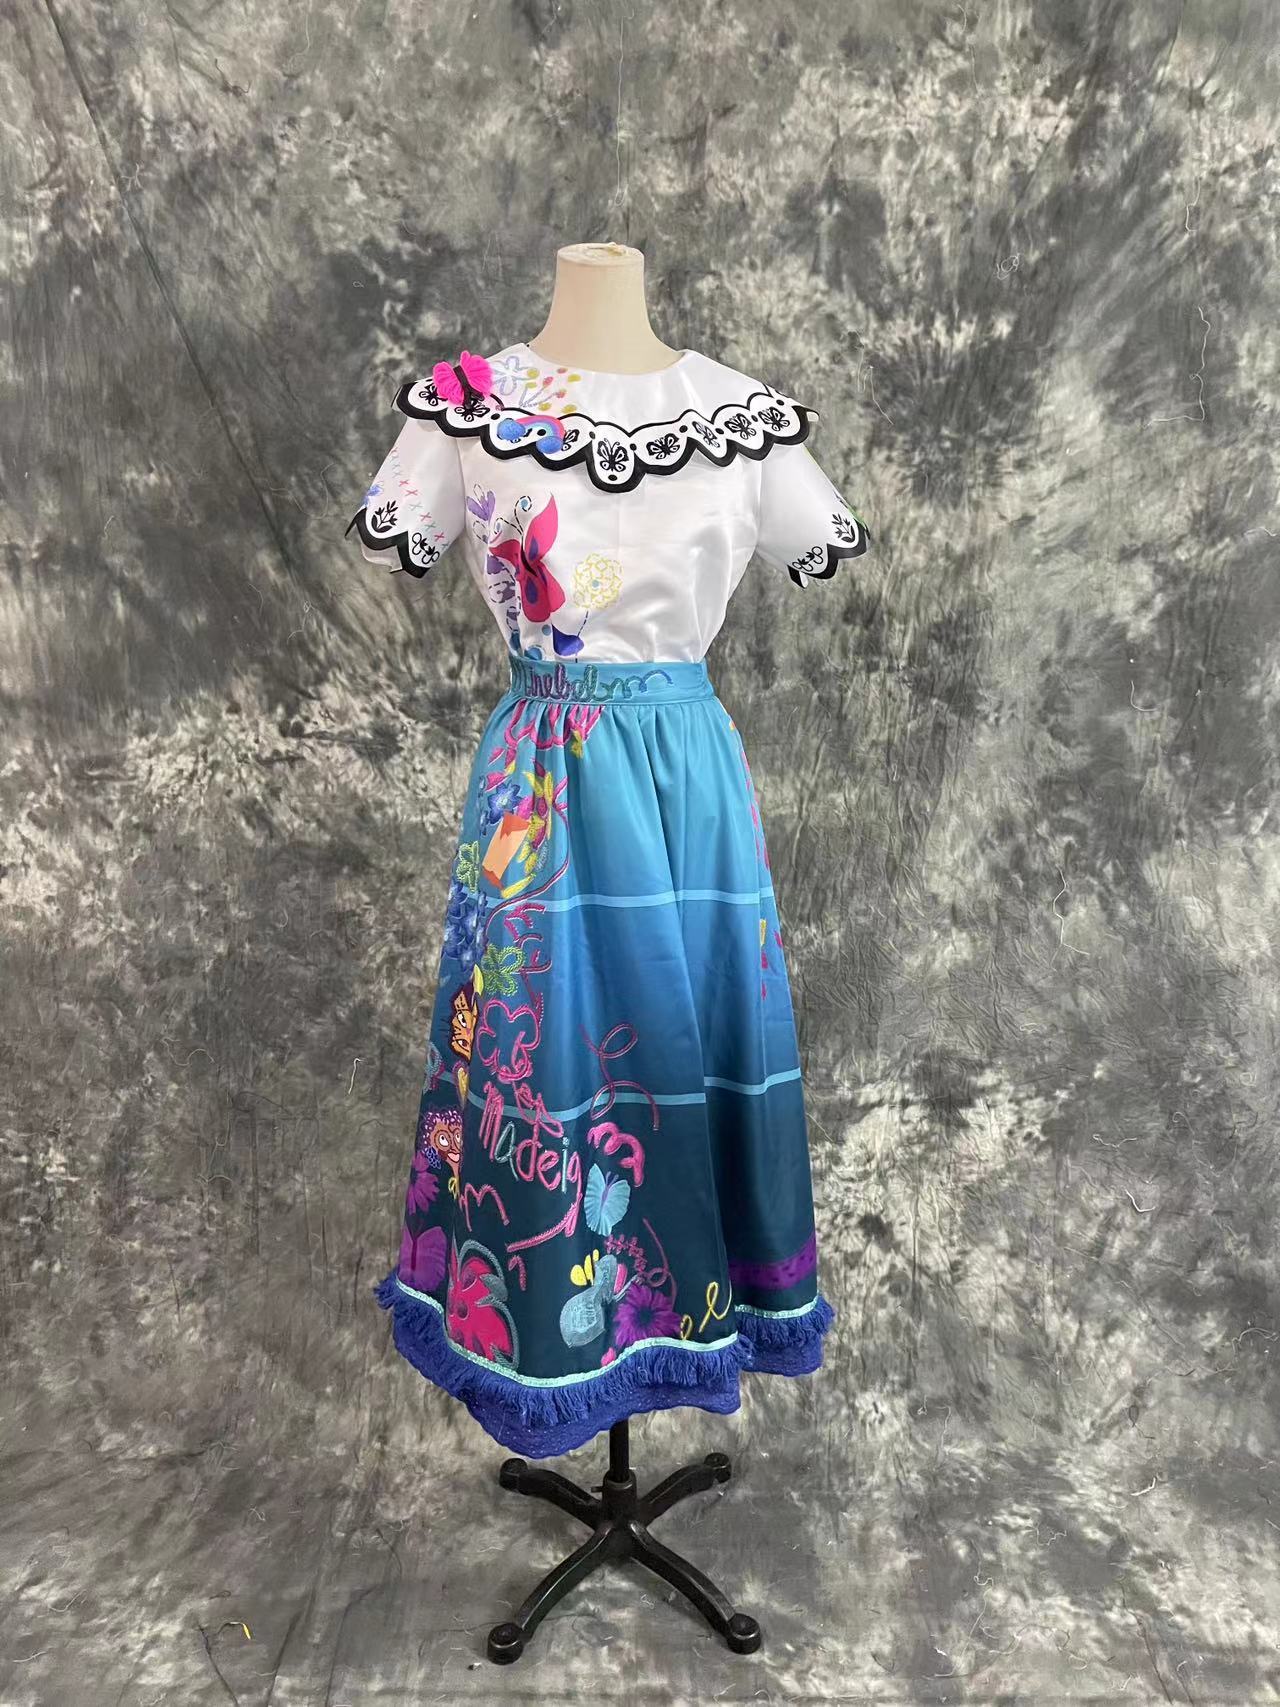 Encanto Mirabel Dolores Printed Dress Cosplay Costumes